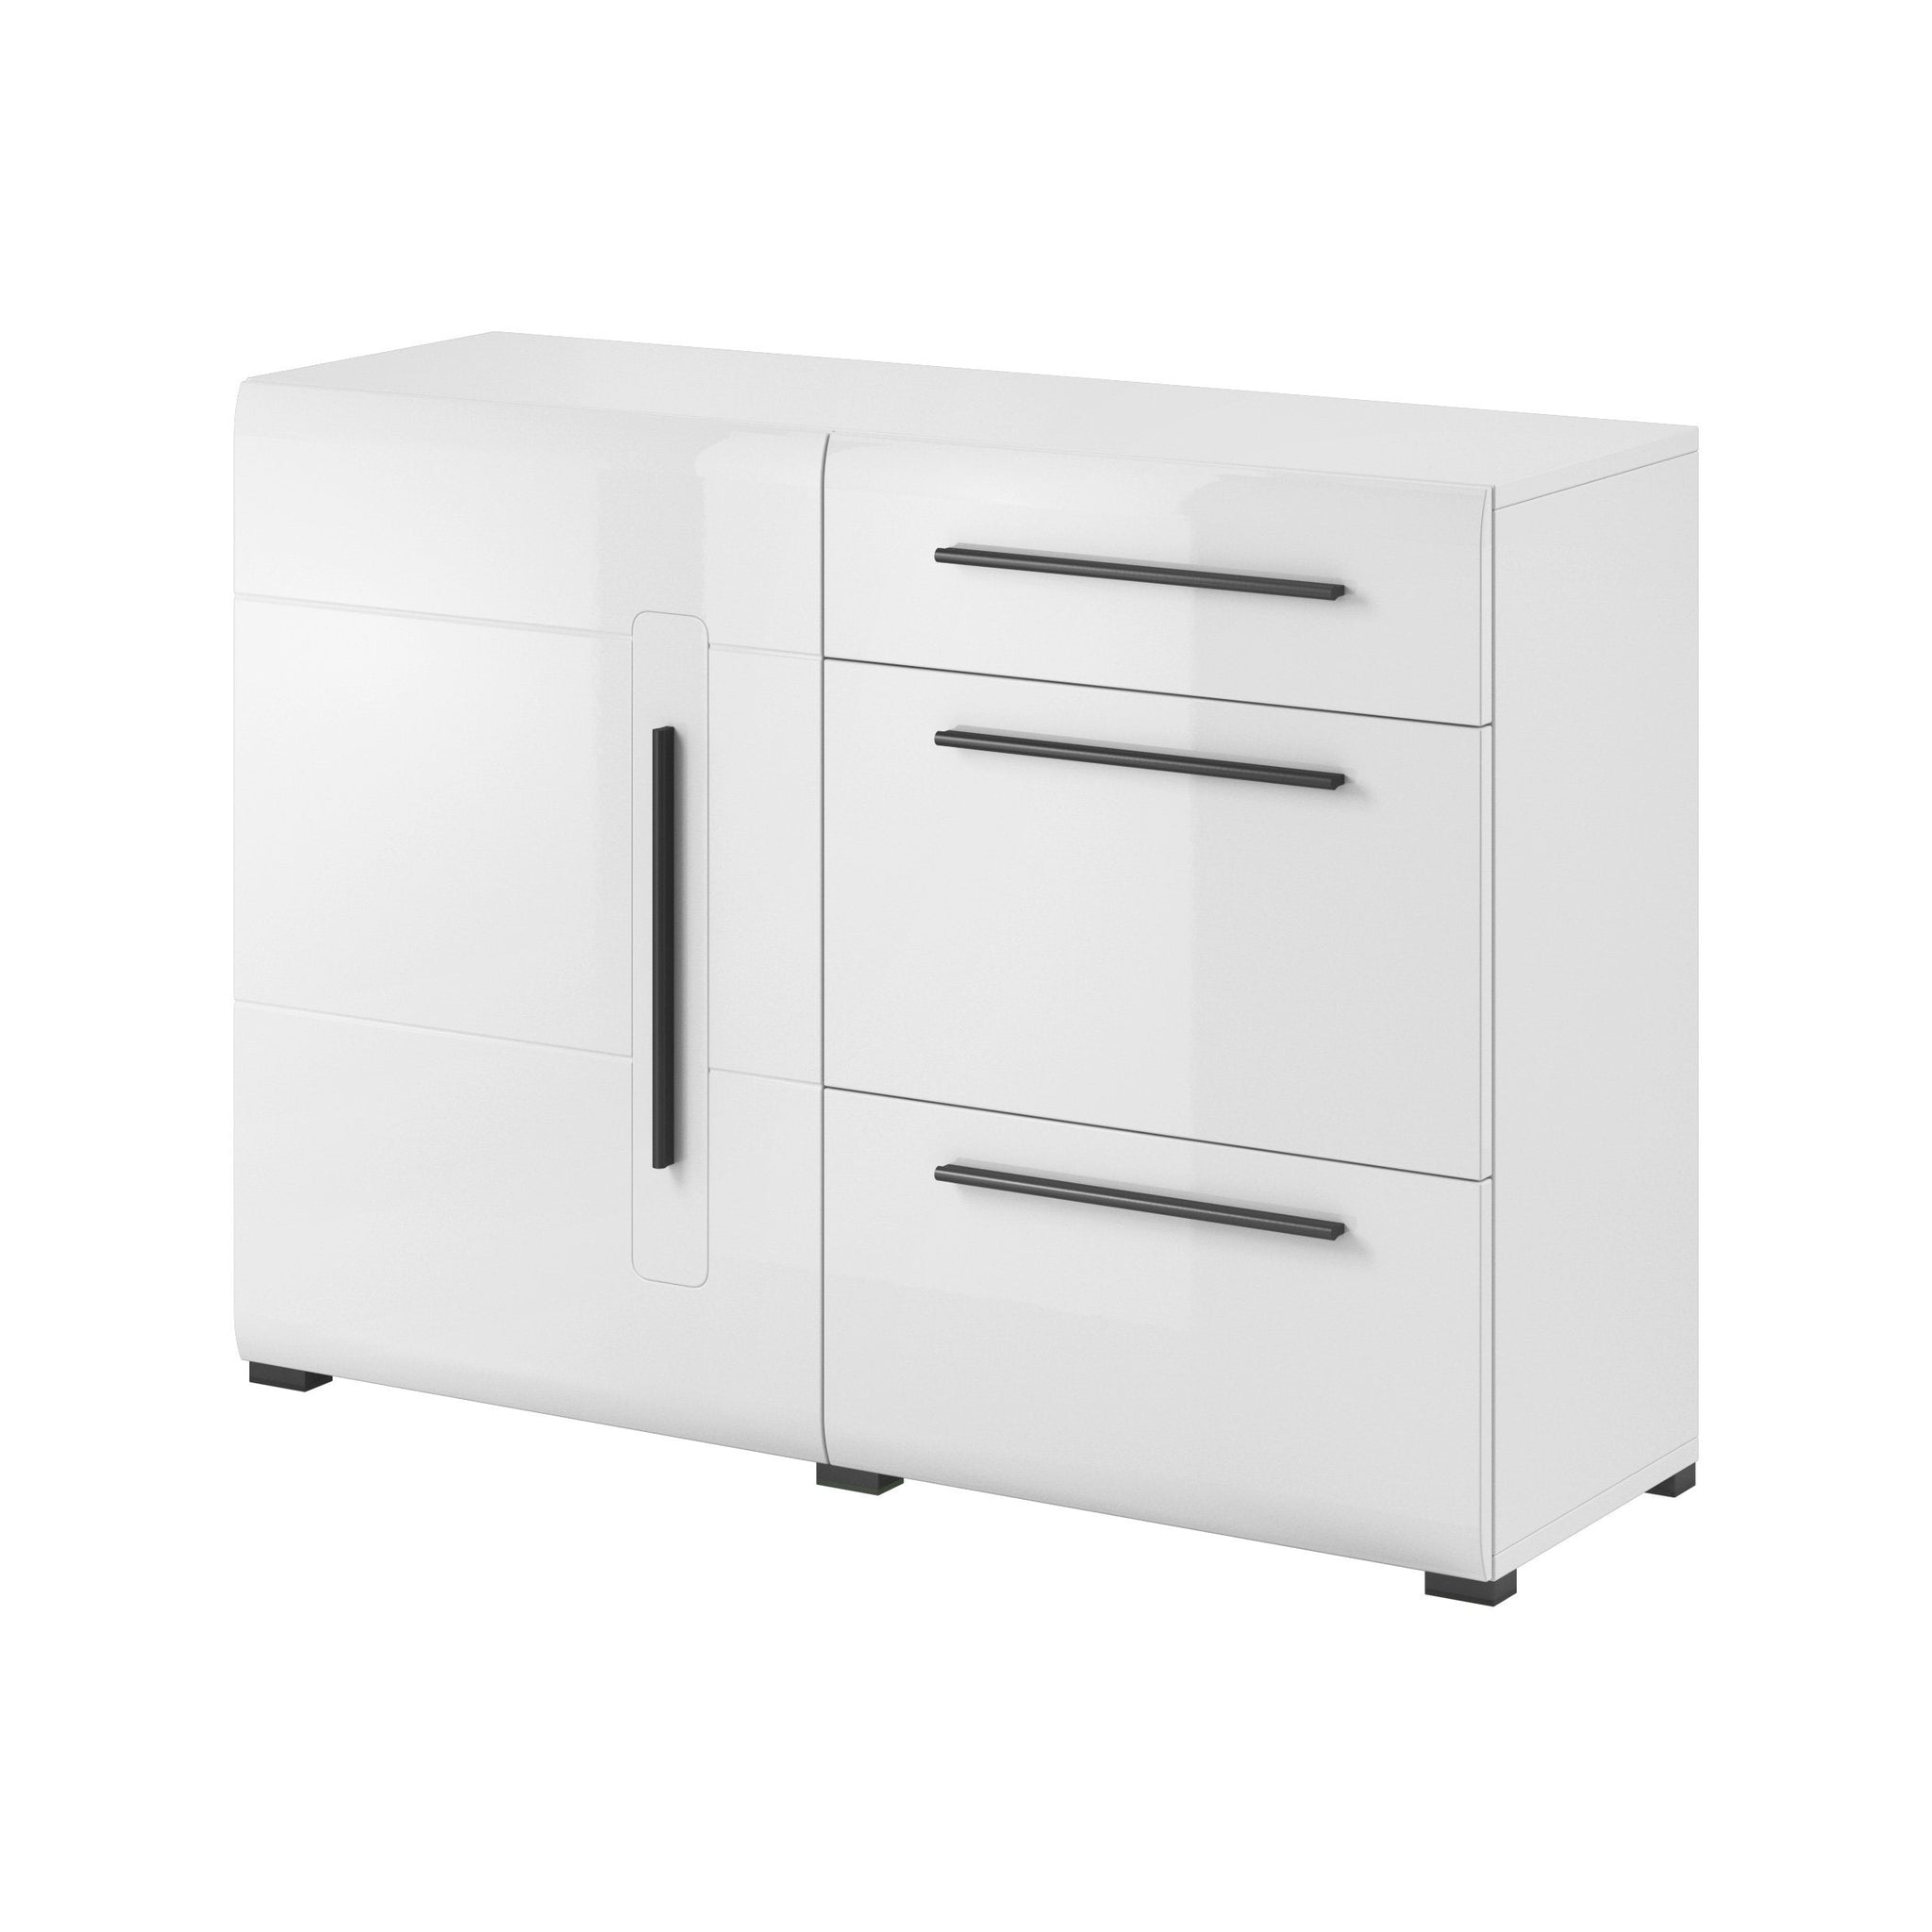 Tulsa 45 Sideboard Cabinet White Gloss Living Sideboard Cabinet 